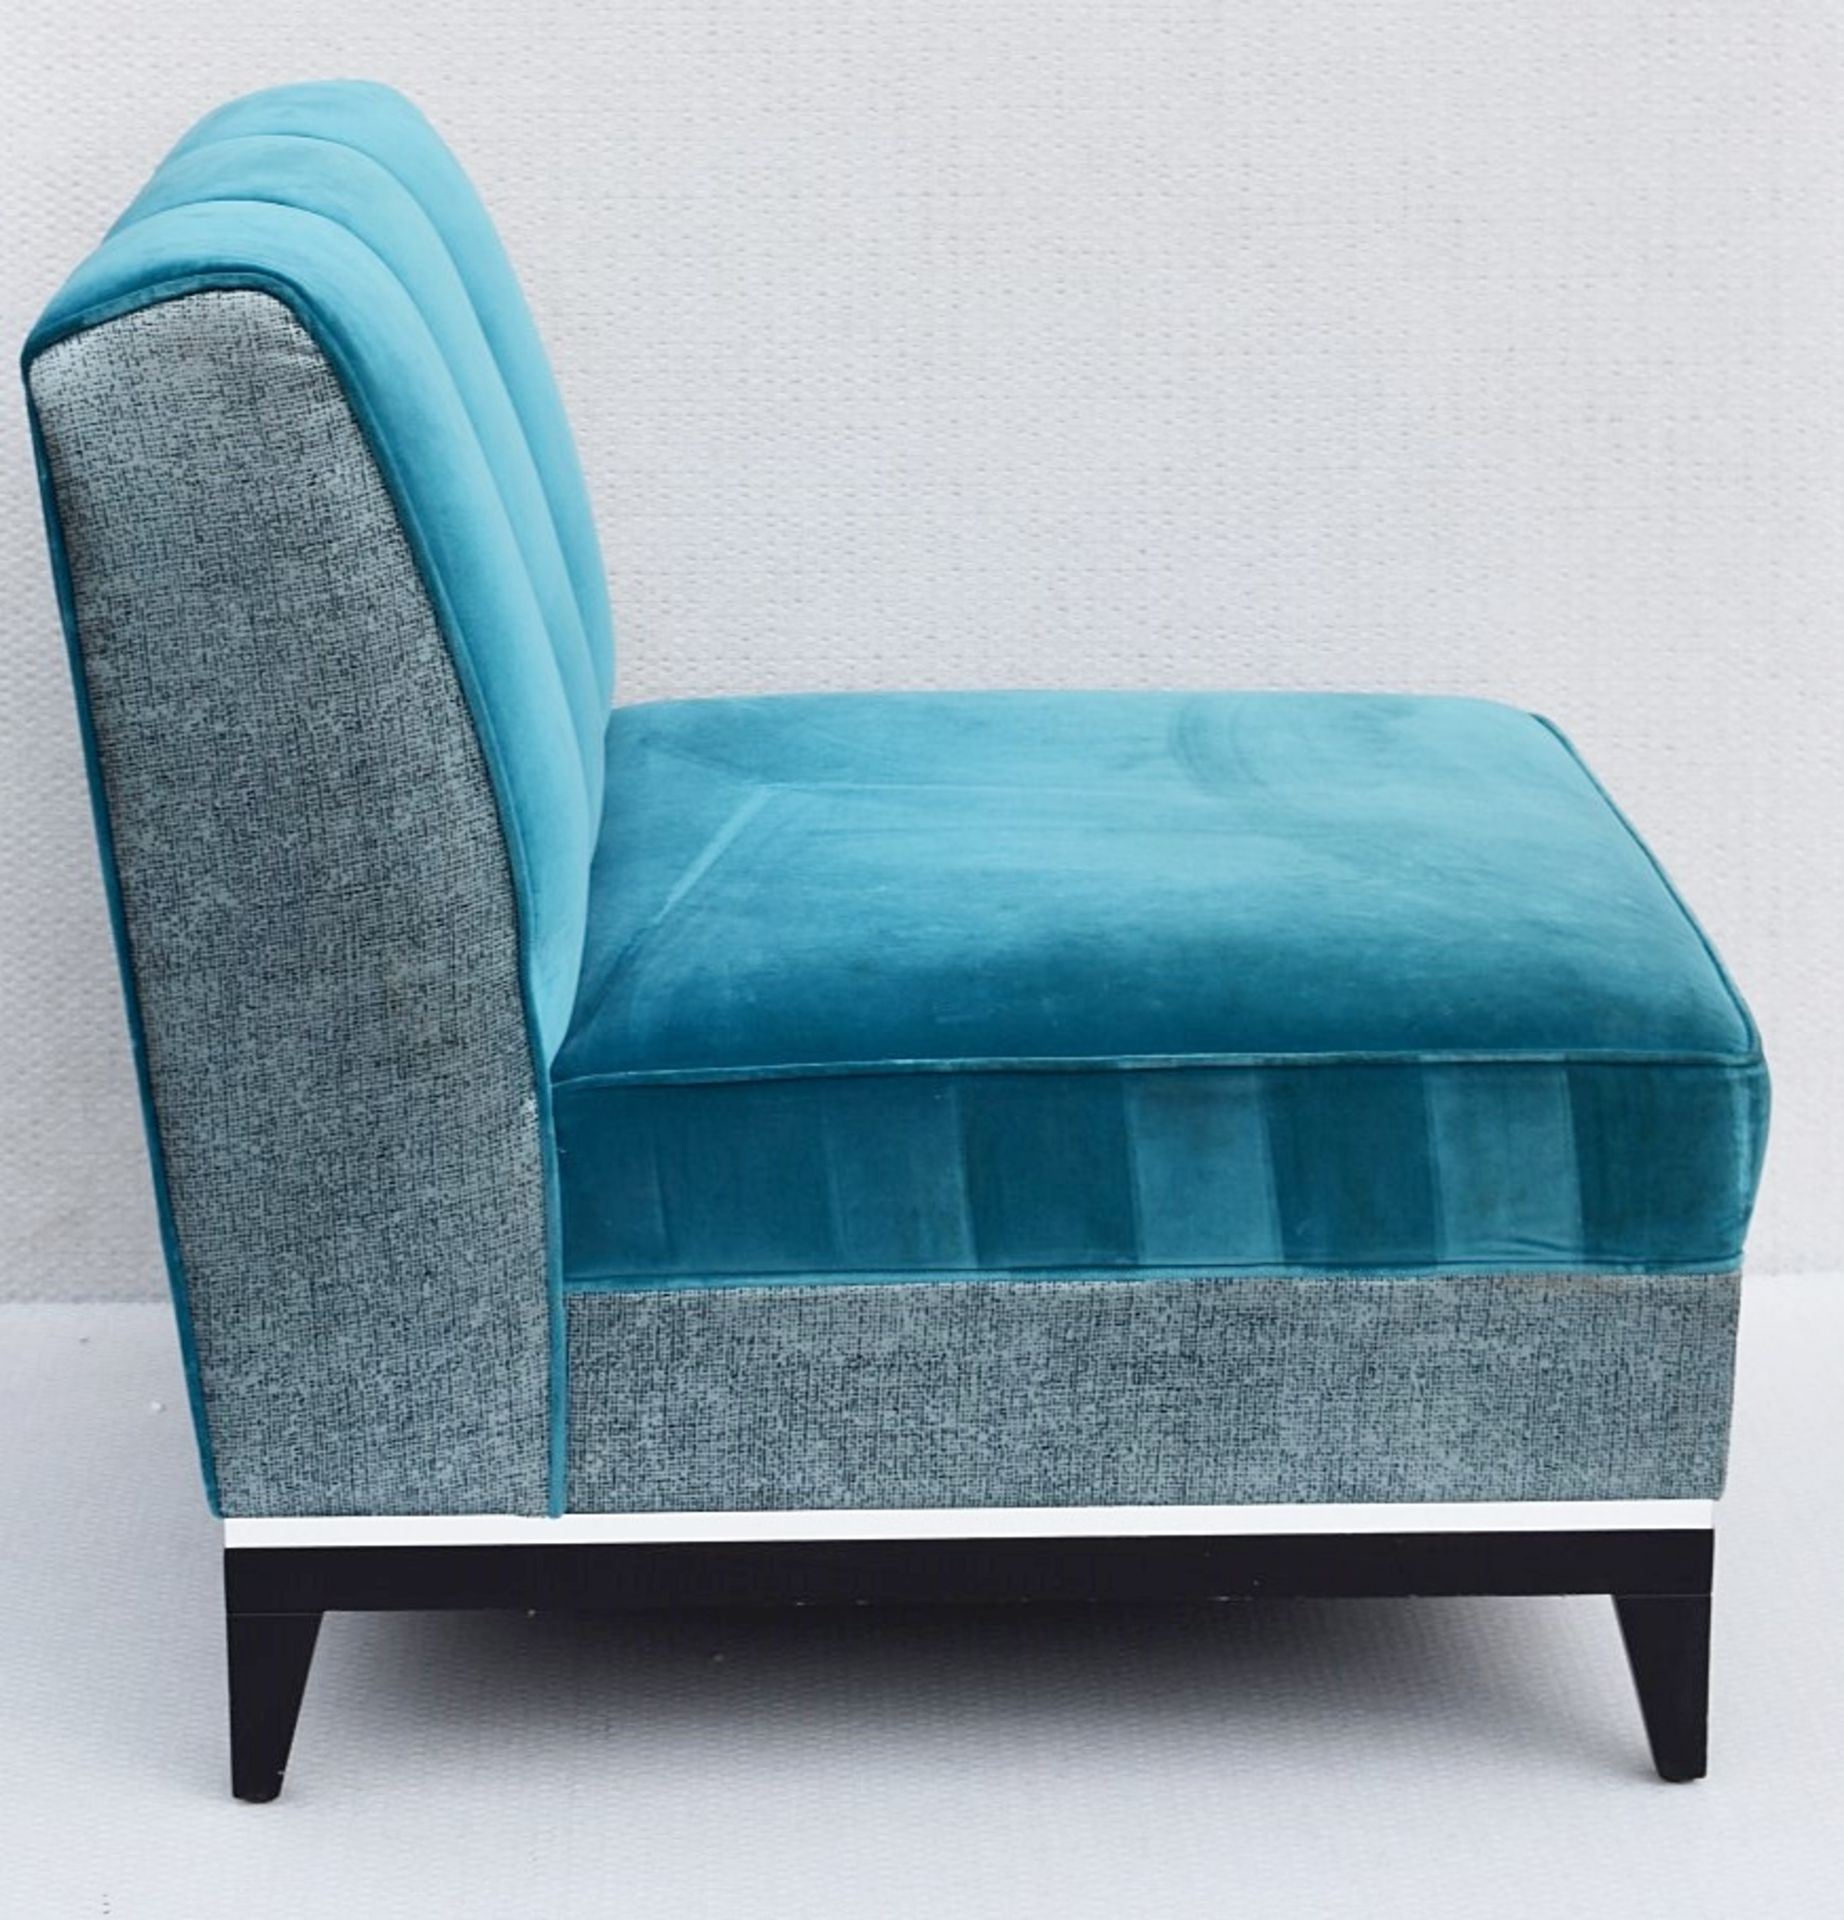 1 x Large Blue Velvet Upholstered Armchair - Ref: HBK501 / WH2 - CL987 - Location: Altrincham WA14* - Image 2 of 10